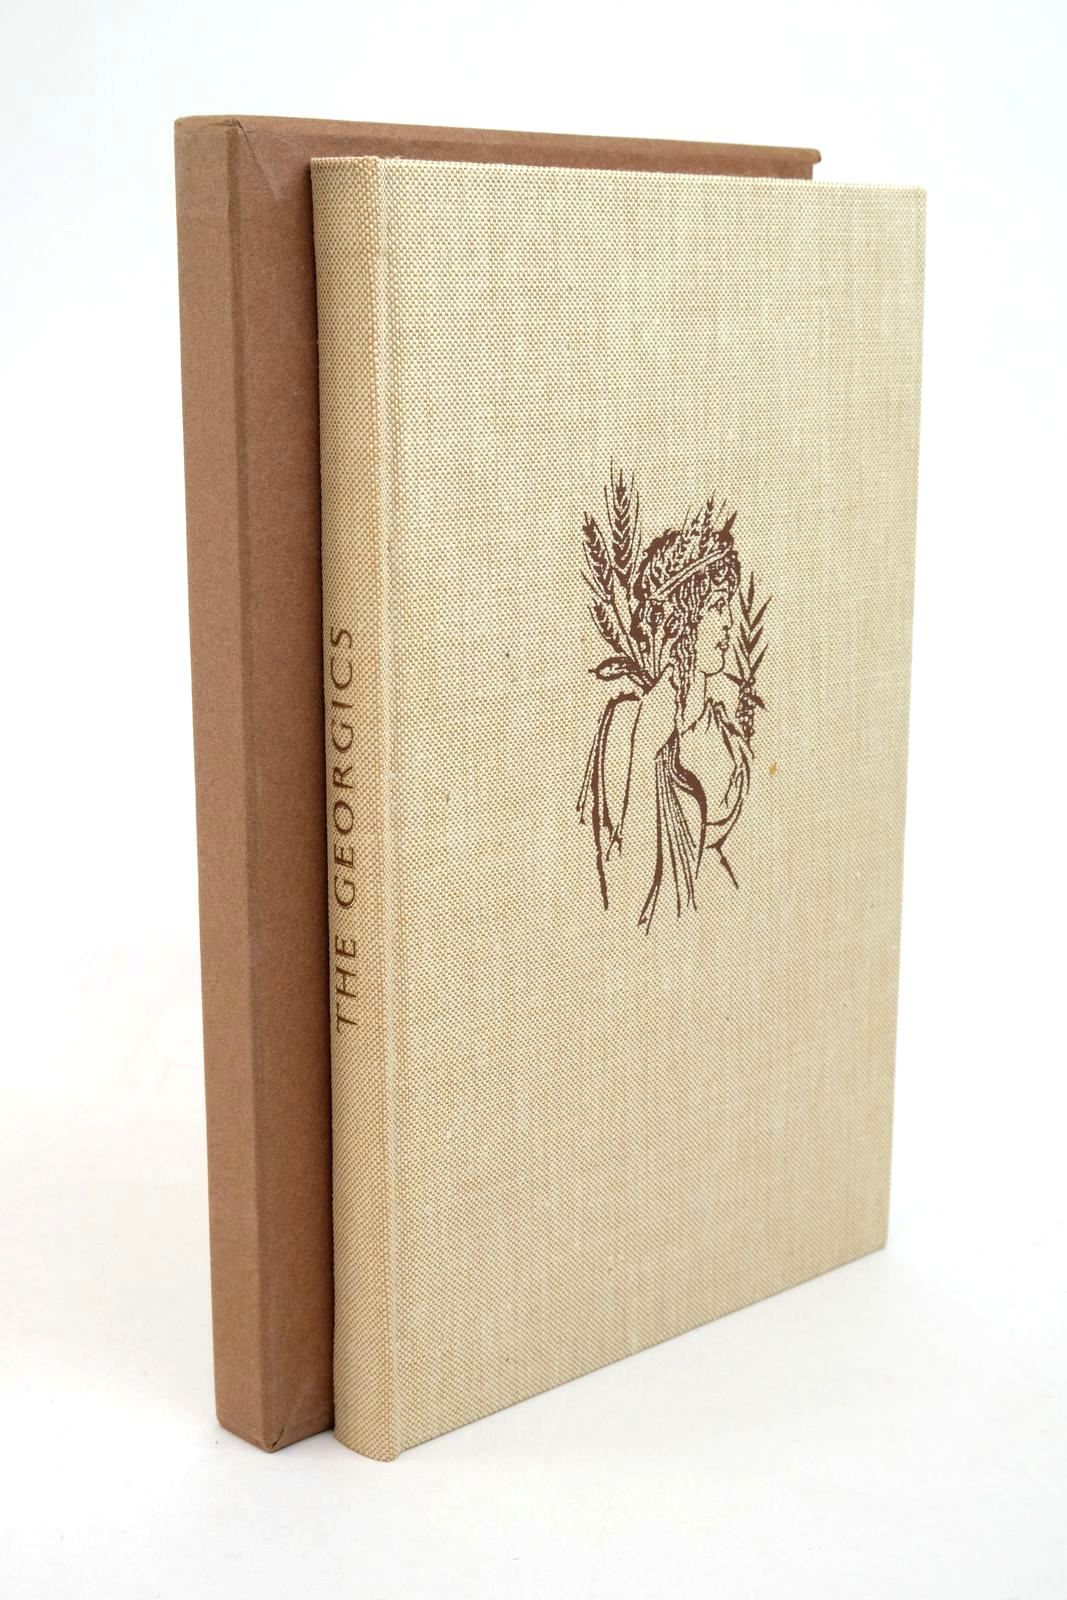 Photo of THE GEORGICS written by Virgil,  Maro, Publius Virgilius Mackenzie, K.R. illustrated by Lambourne, Nigel published by Folio Society (STOCK CODE: 1322887)  for sale by Stella & Rose's Books